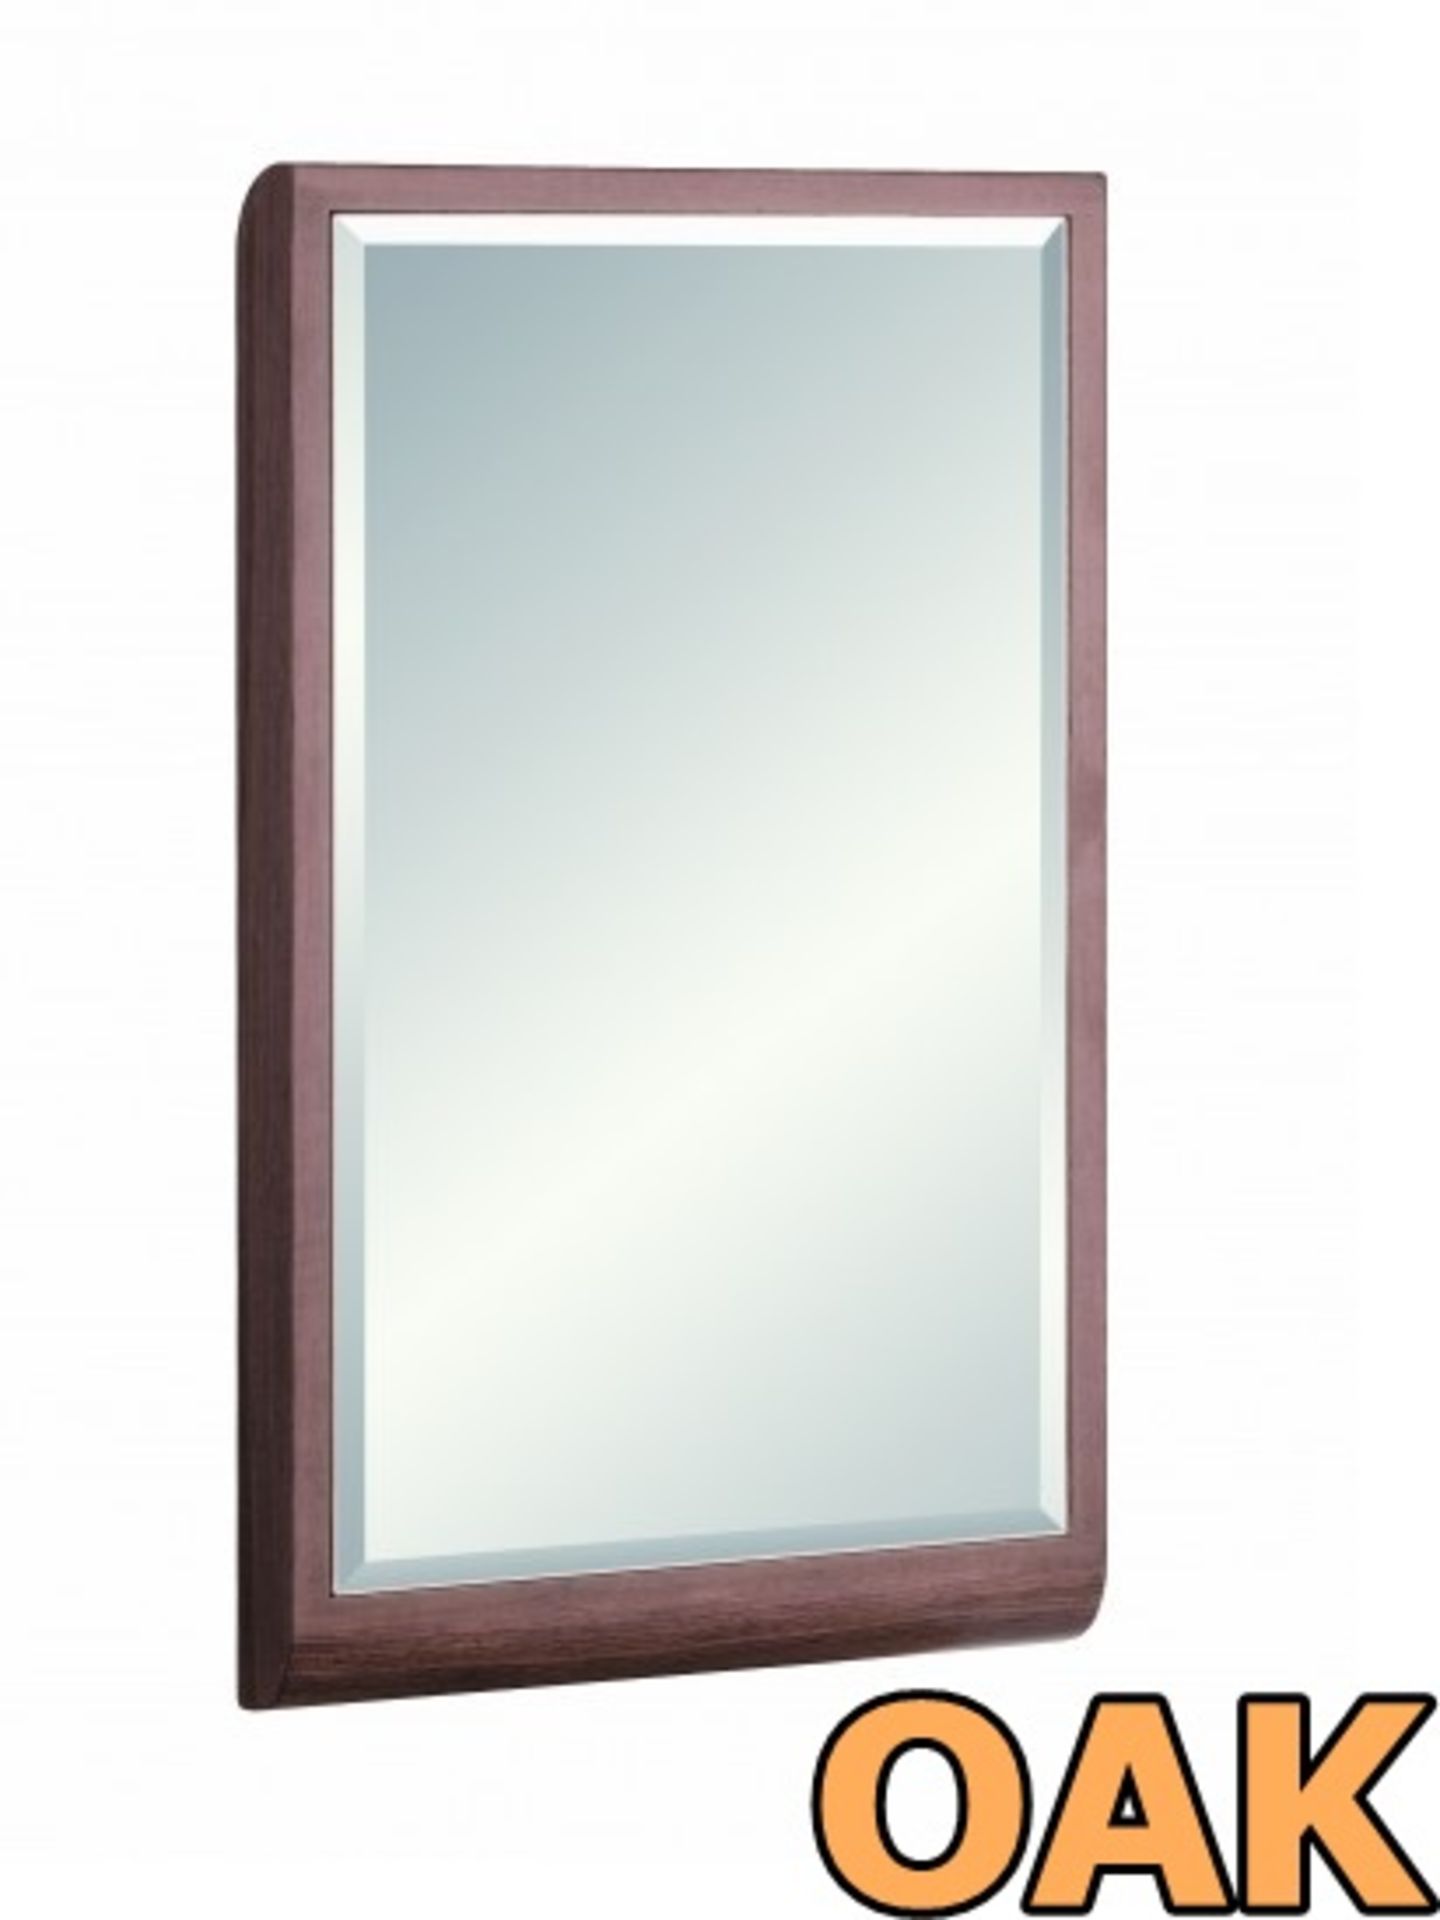 1 x Vogue ARC Series 1 Wall Mounted WALL MIRROR In LIGHT OAK - Size 350 x 600mm - Manufactured to